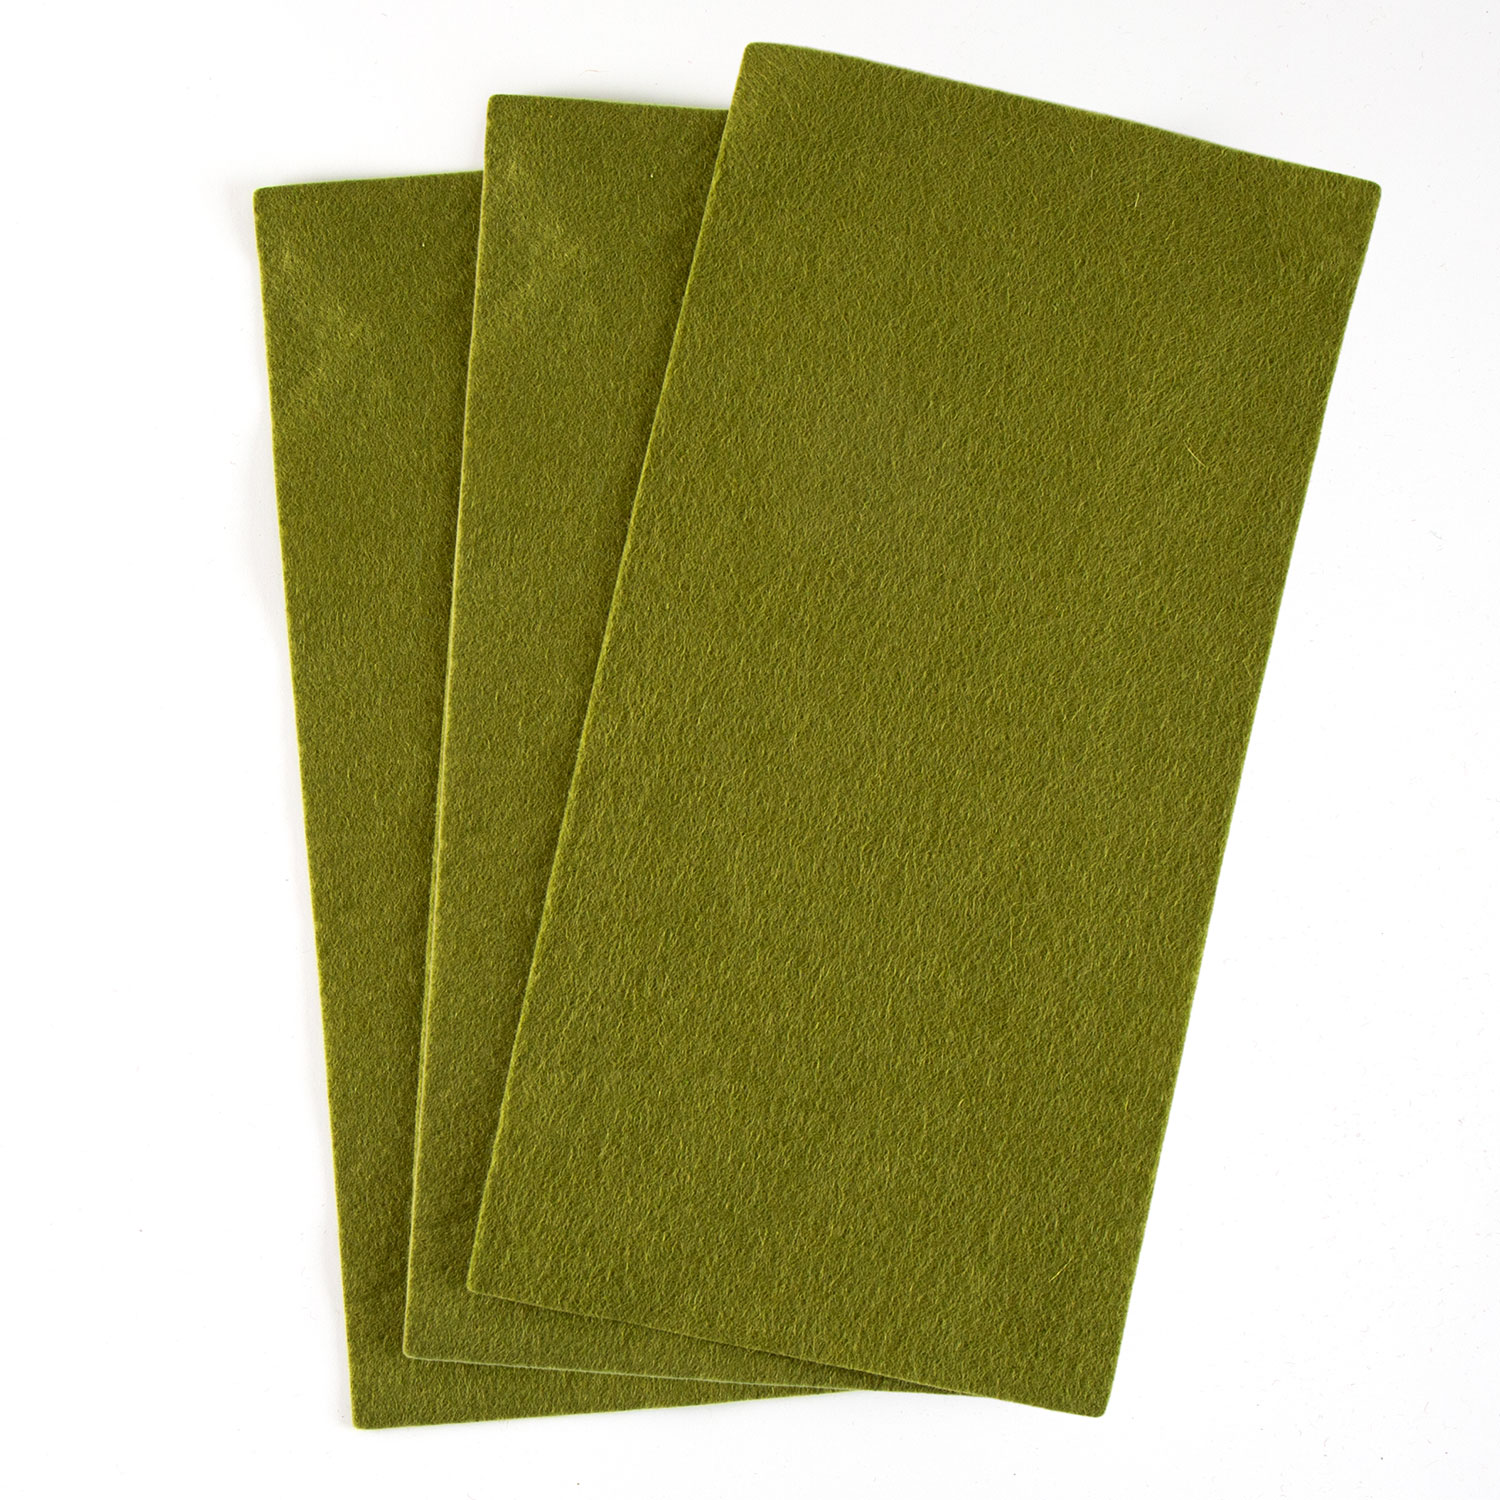 Felt by Clarity Mug Rug Backers Pack of 3 x 11.5x6" Non Adhesive Backed Felt Pick N Mix - Pick any 2  - Olive Green